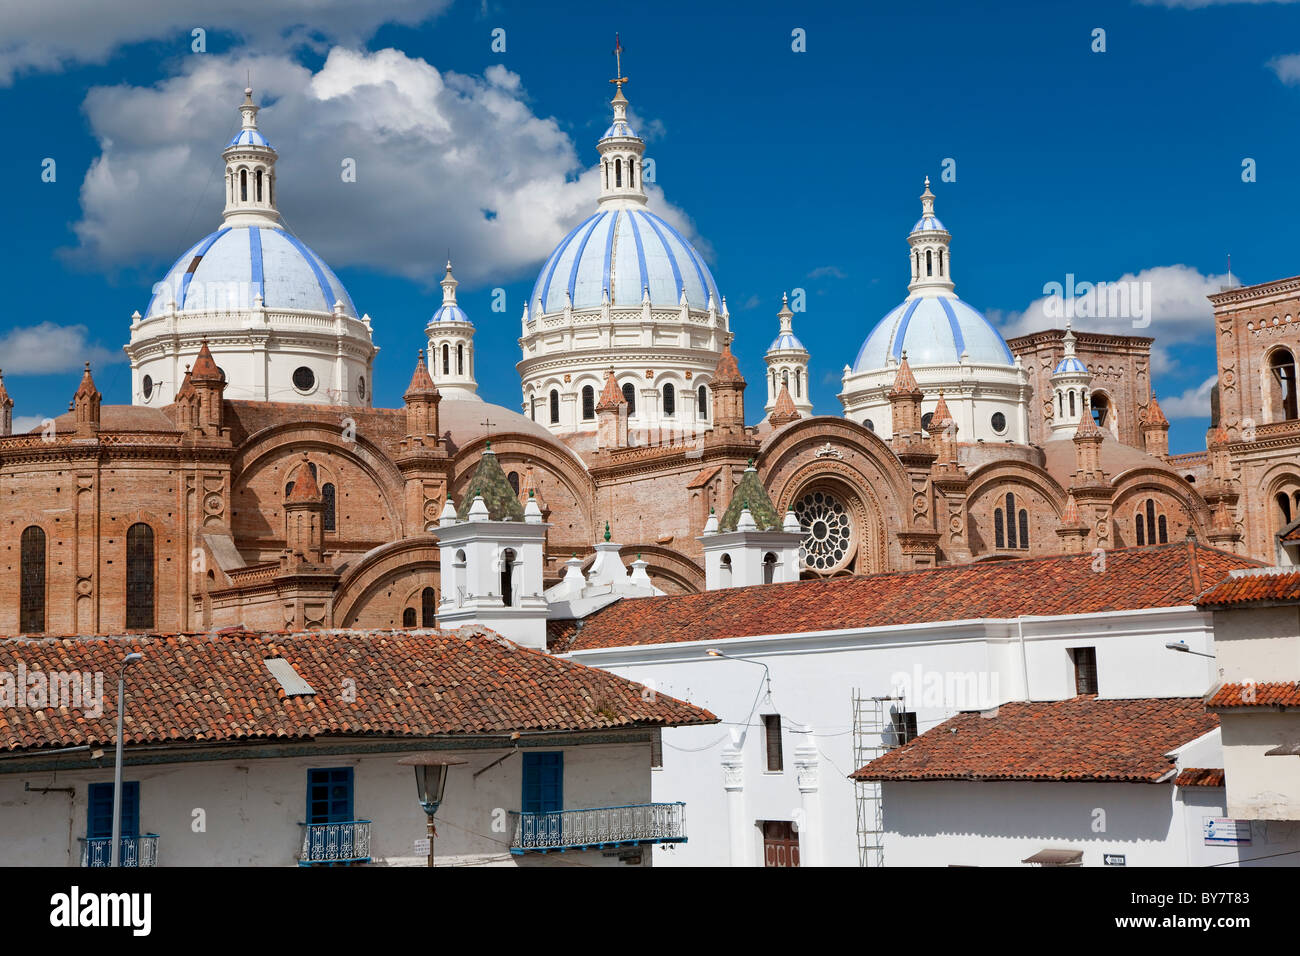 Cathedral of the Immaculate Conception, built in 1885, Cuenca, Ecuador Stock Photo